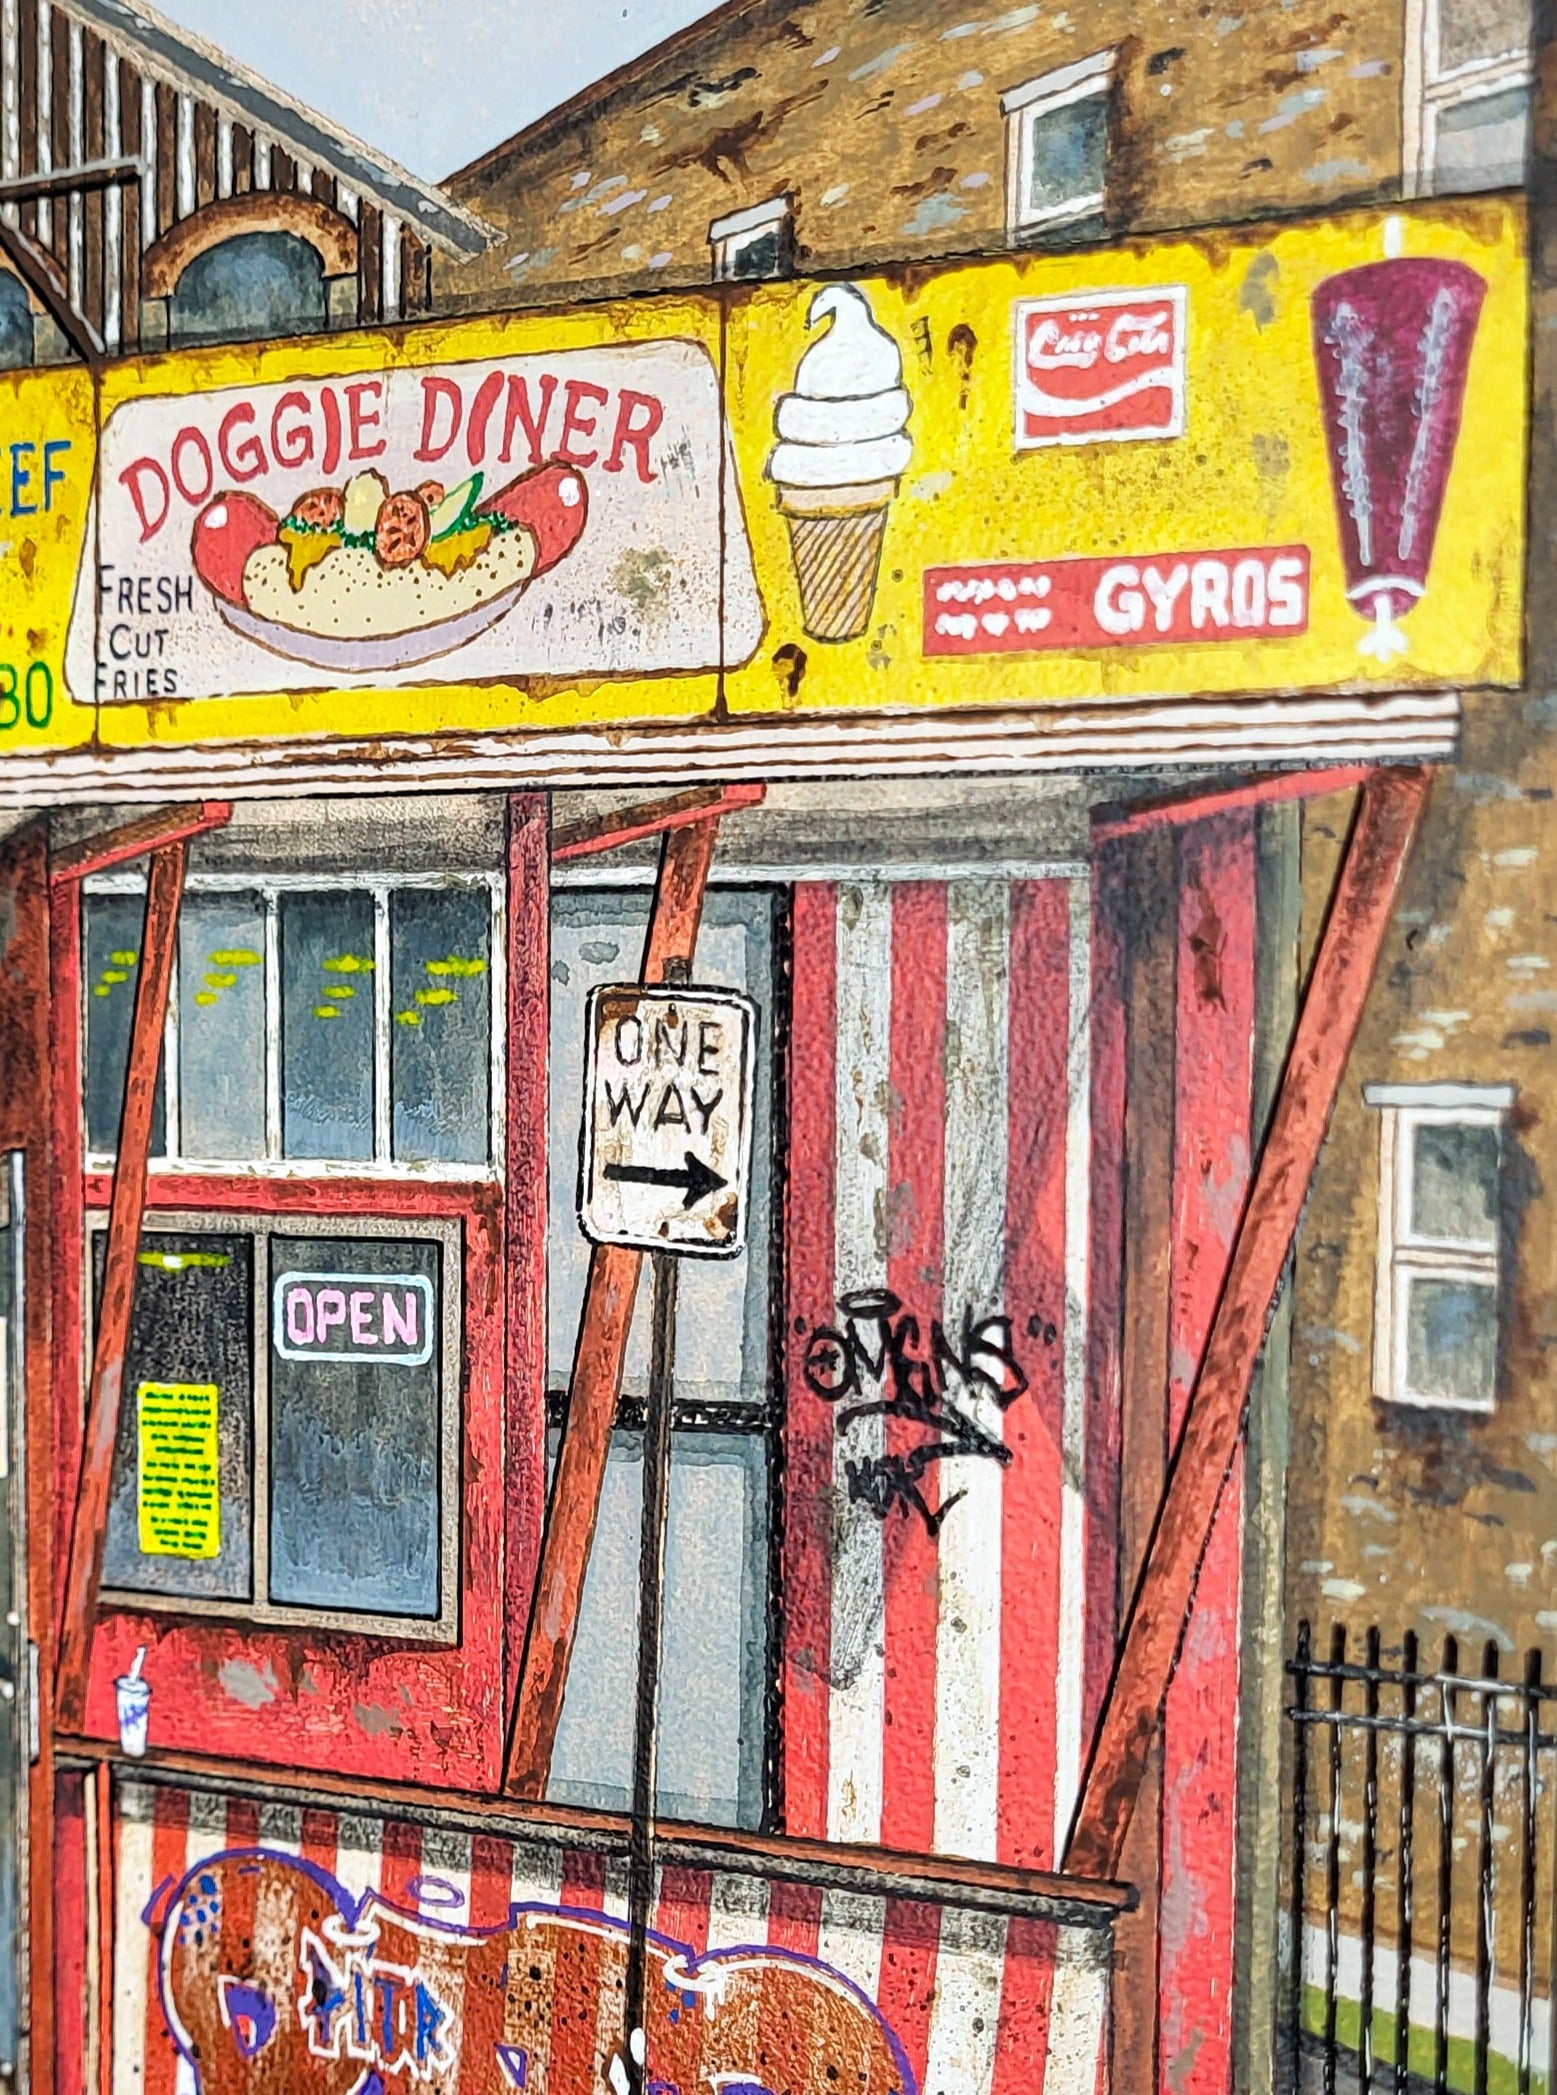 “Doggie Diner” by Pizza In The Rain